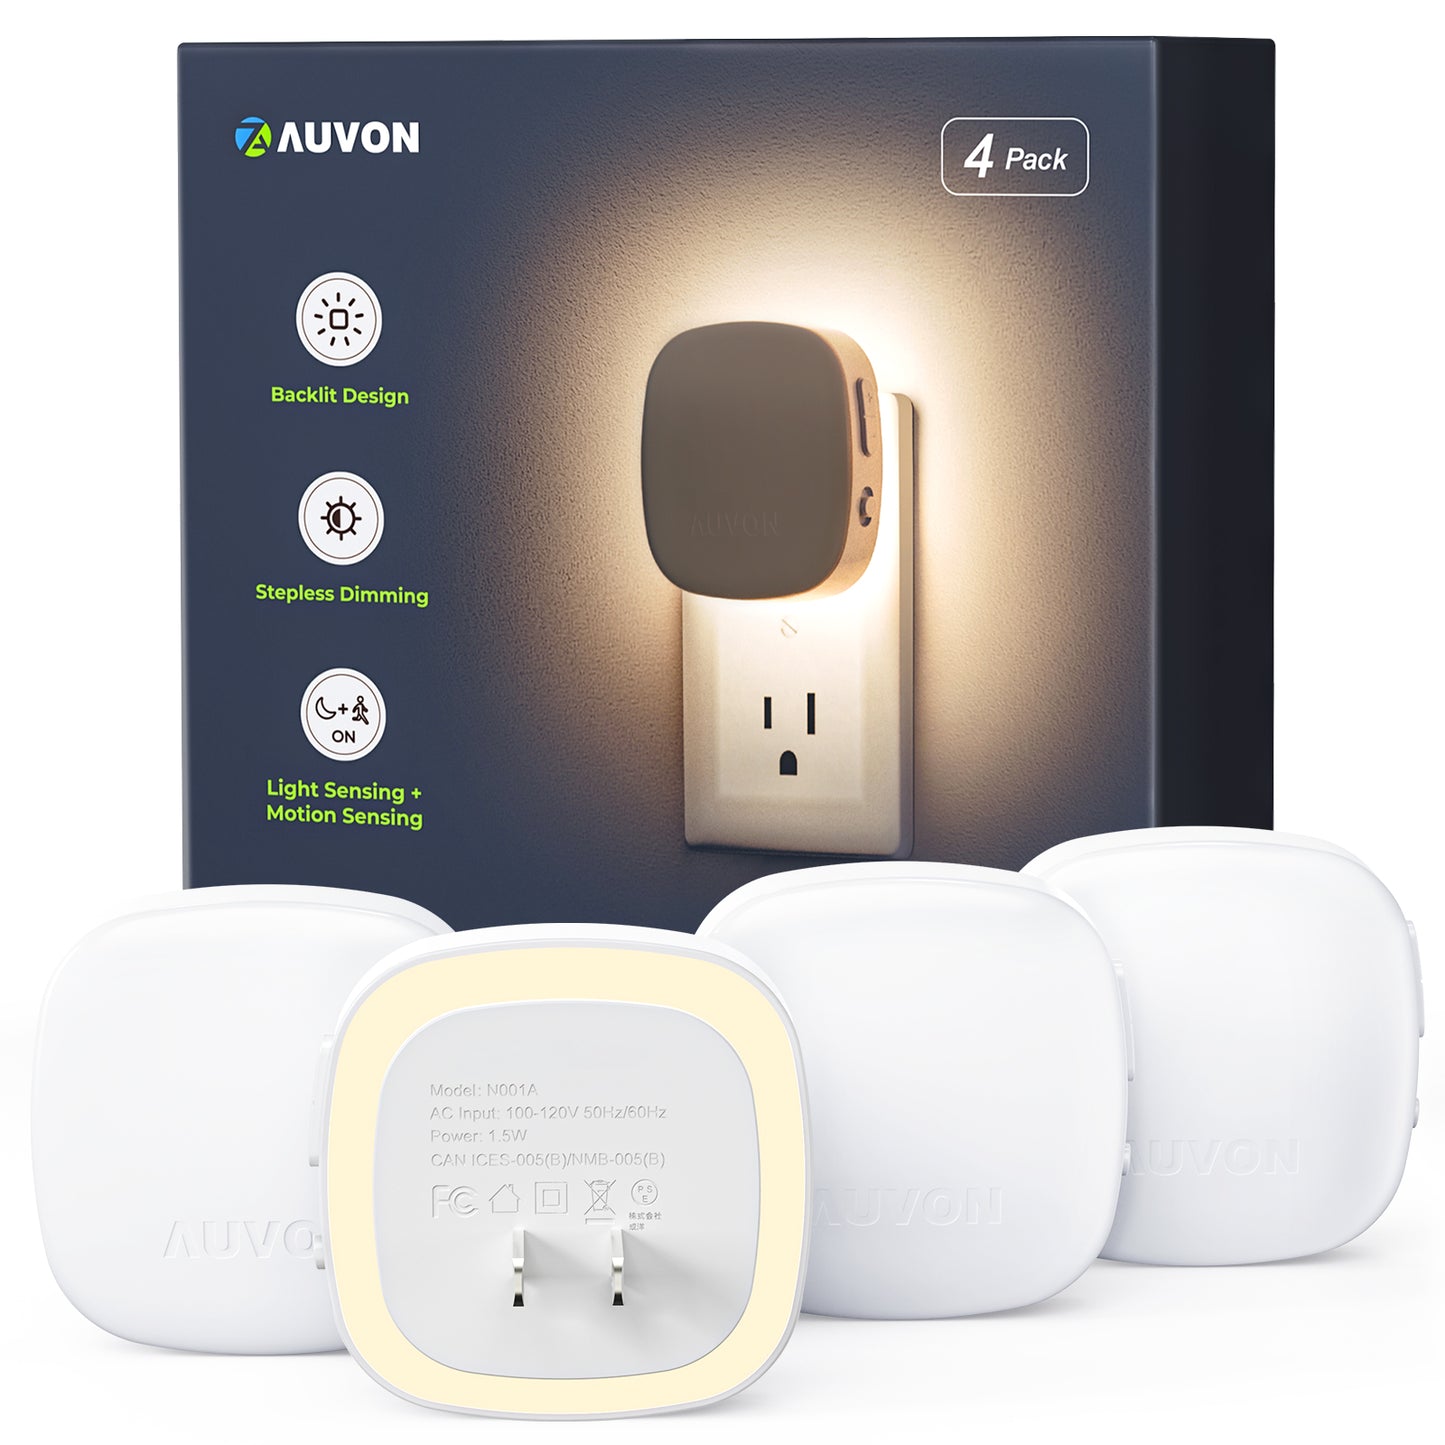 AUVON Plug-in LED Backlit Night Light with Motion Sensor & Dusk to Dawn Sensor, Dimmable Warm White Nightlight with 1-50 lm Adjustable Brightness for Bedroom, Bathroom, Stairs, Hallway (4 Pack)